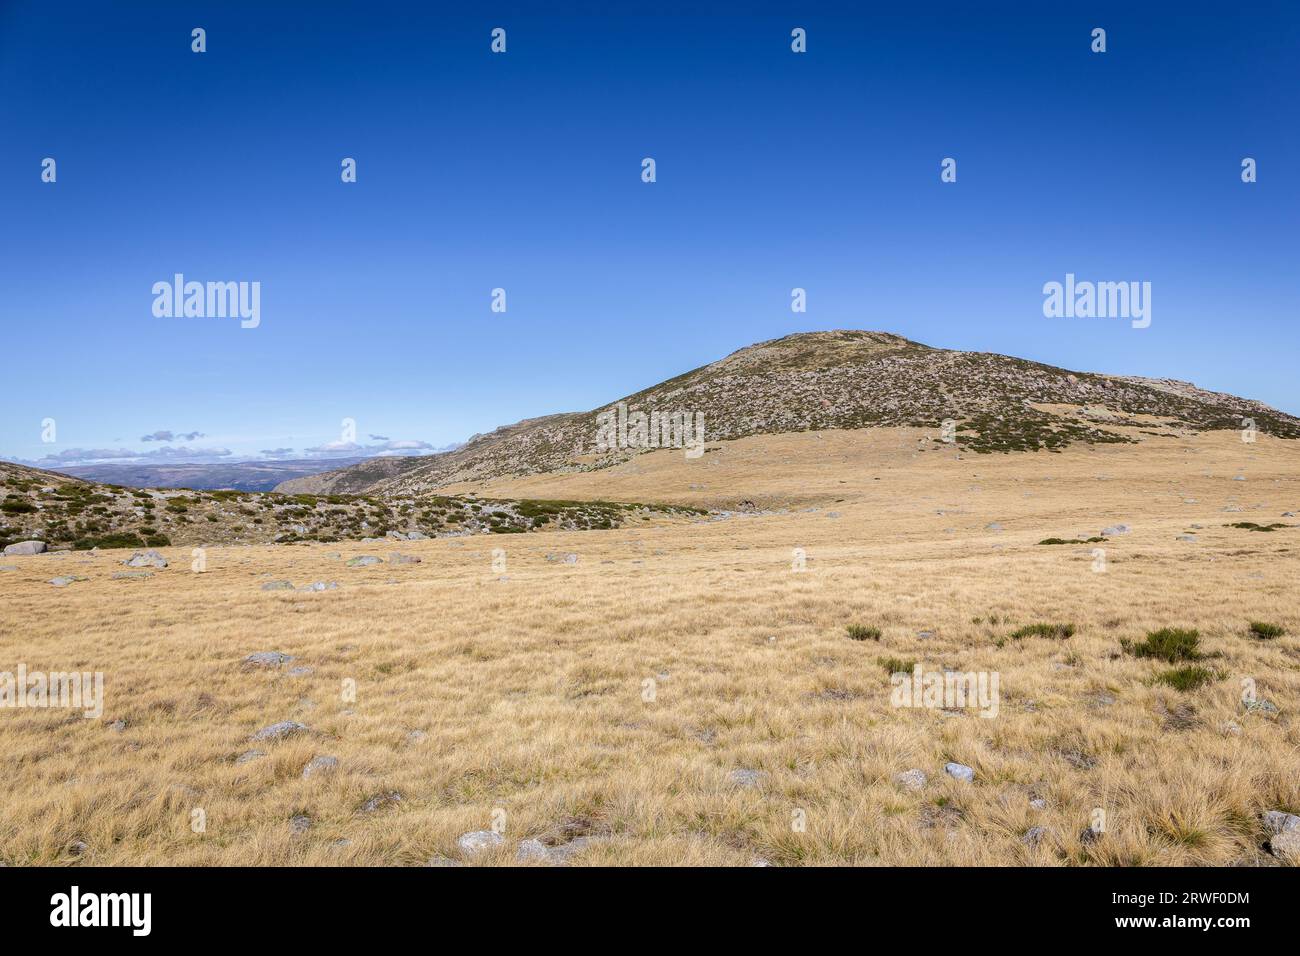 Sierra de Gredos mountain landscape in autumn, dry, barren vegetation and rocky hills, seen from the trail to the Laguna Grande de Gredos, Spain. Stock Photo